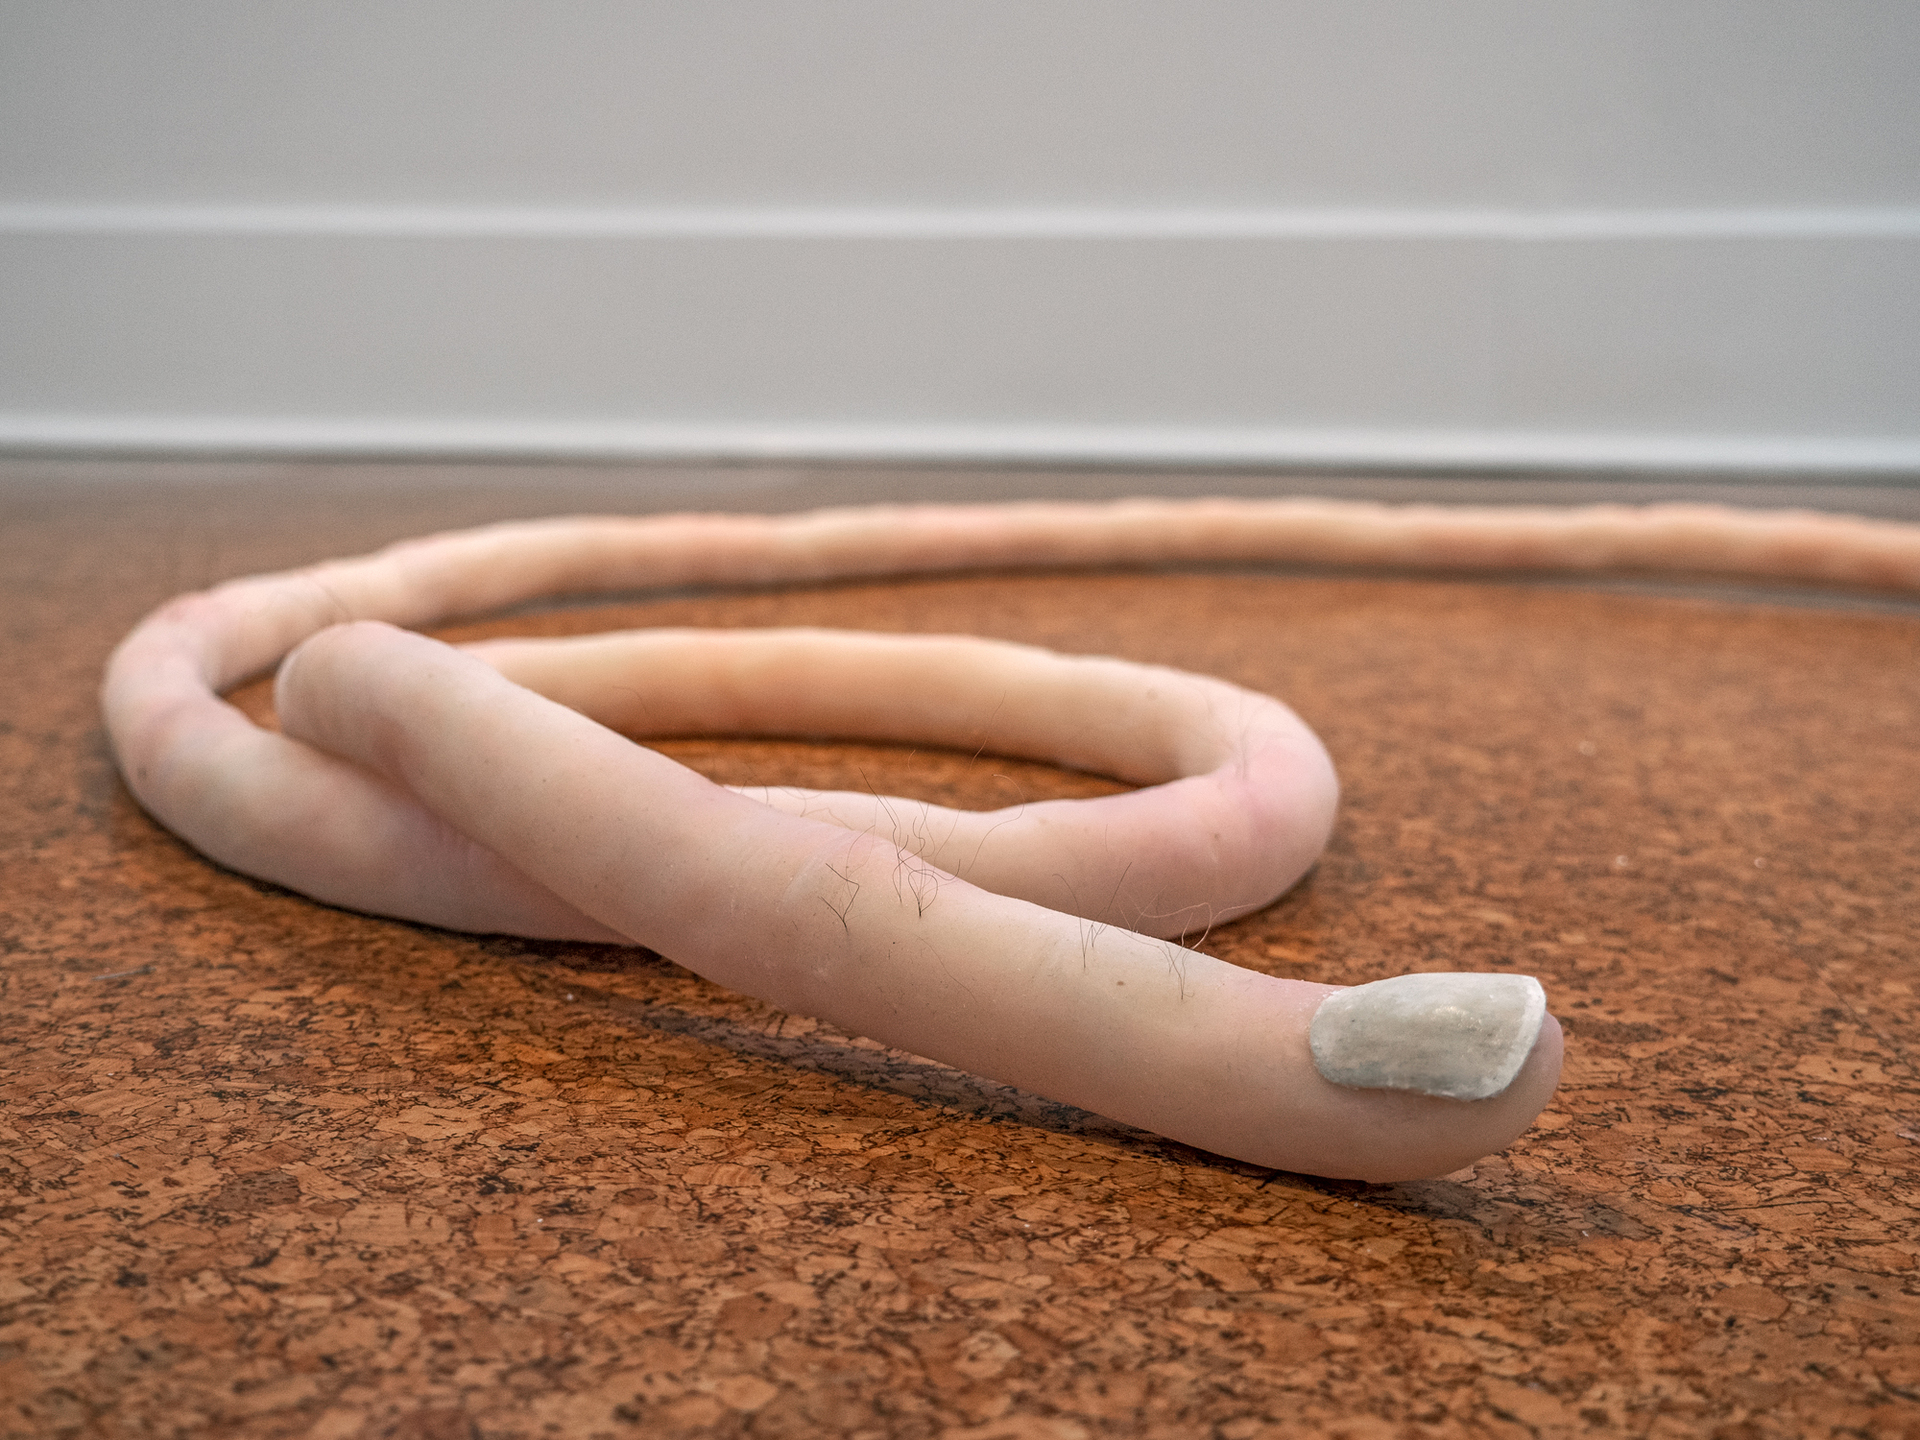 Detail of "diss-mechanism #1 (or double-ended toe-snake)), 2021; Silicone rubber, synthetic hair, epoxy, wax; 40 x 37 x 43 inches